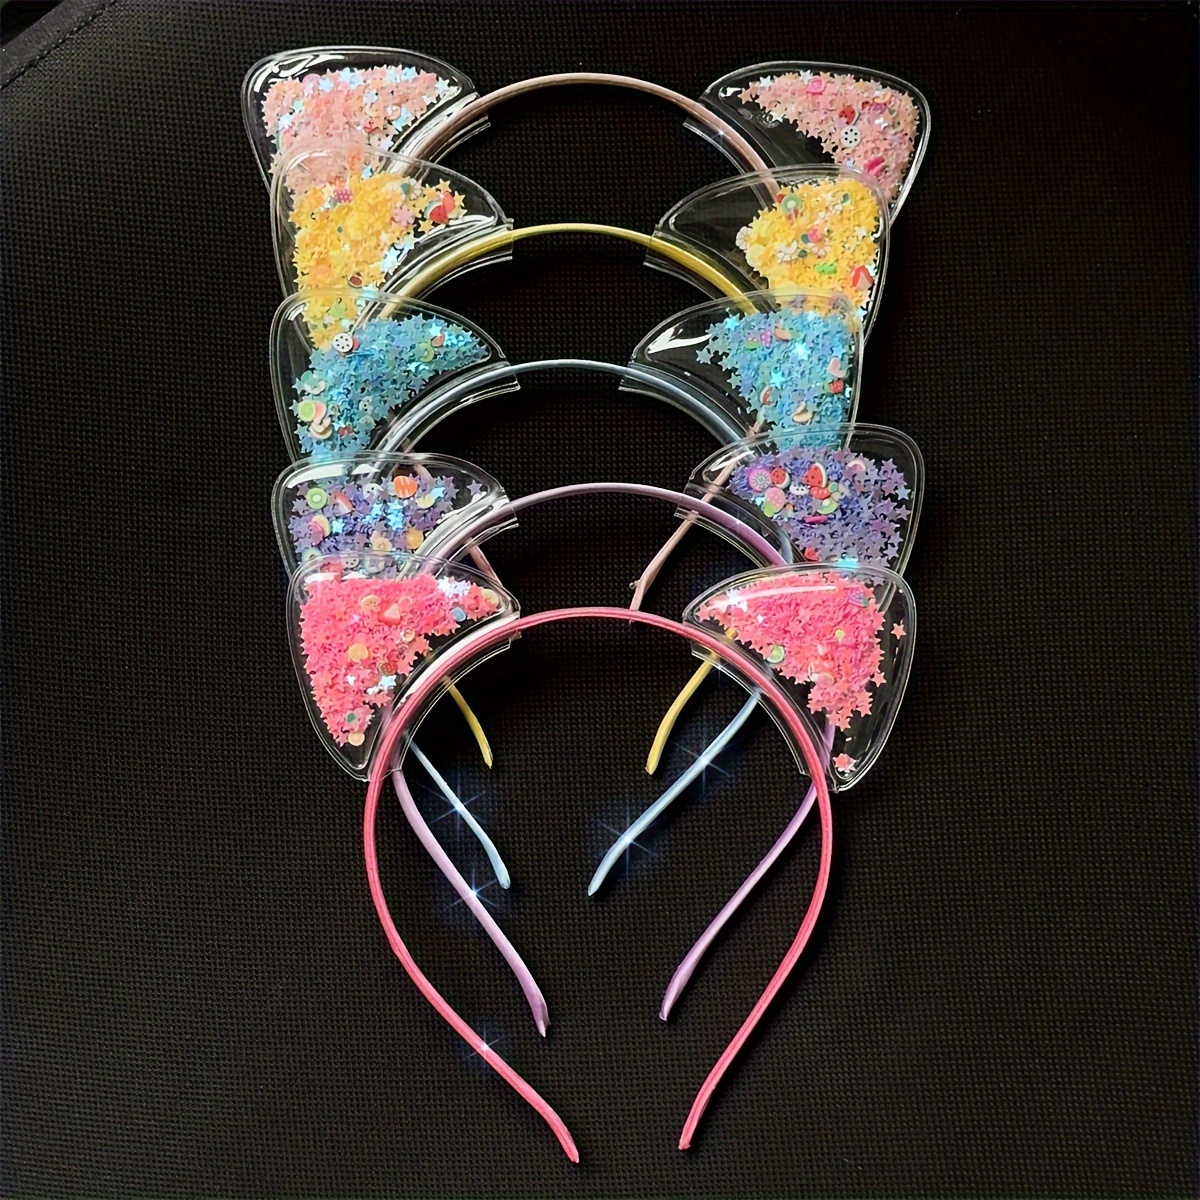 

5-piece Cute & Colorful Quicksand Cat Ear Headbands Set For Women And Girls - Perfect For Parties, Cosplay & Photo Props